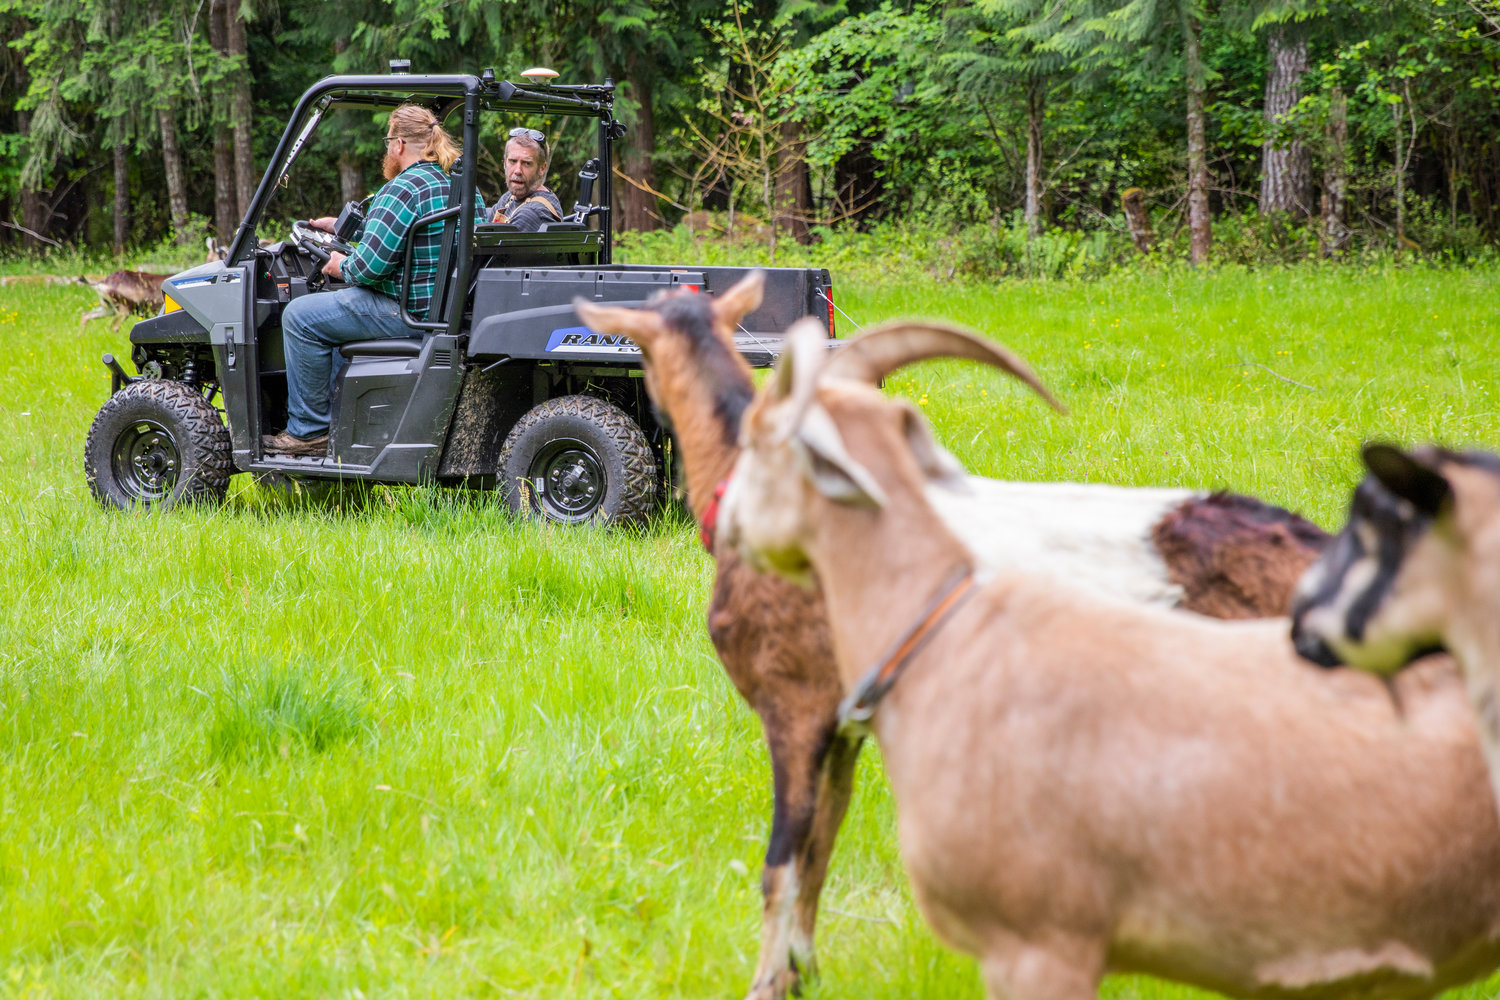 Brian Dennis calls for his herd as Jake Dailey pilots an electric UTV and goats follow.